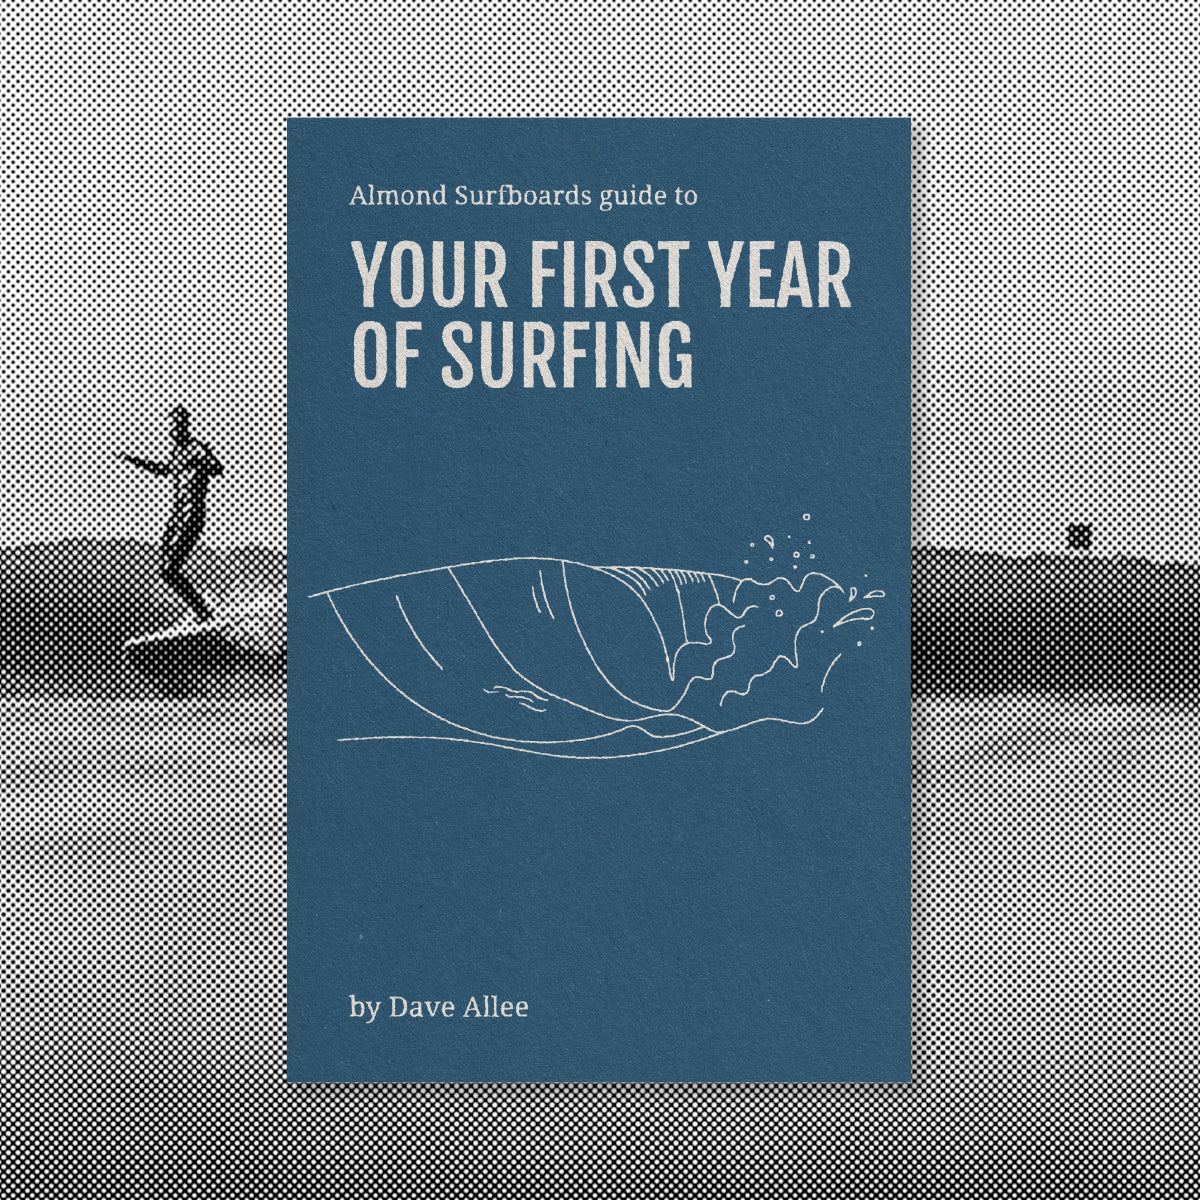 Almond's Guide to Your First Year of Surfing